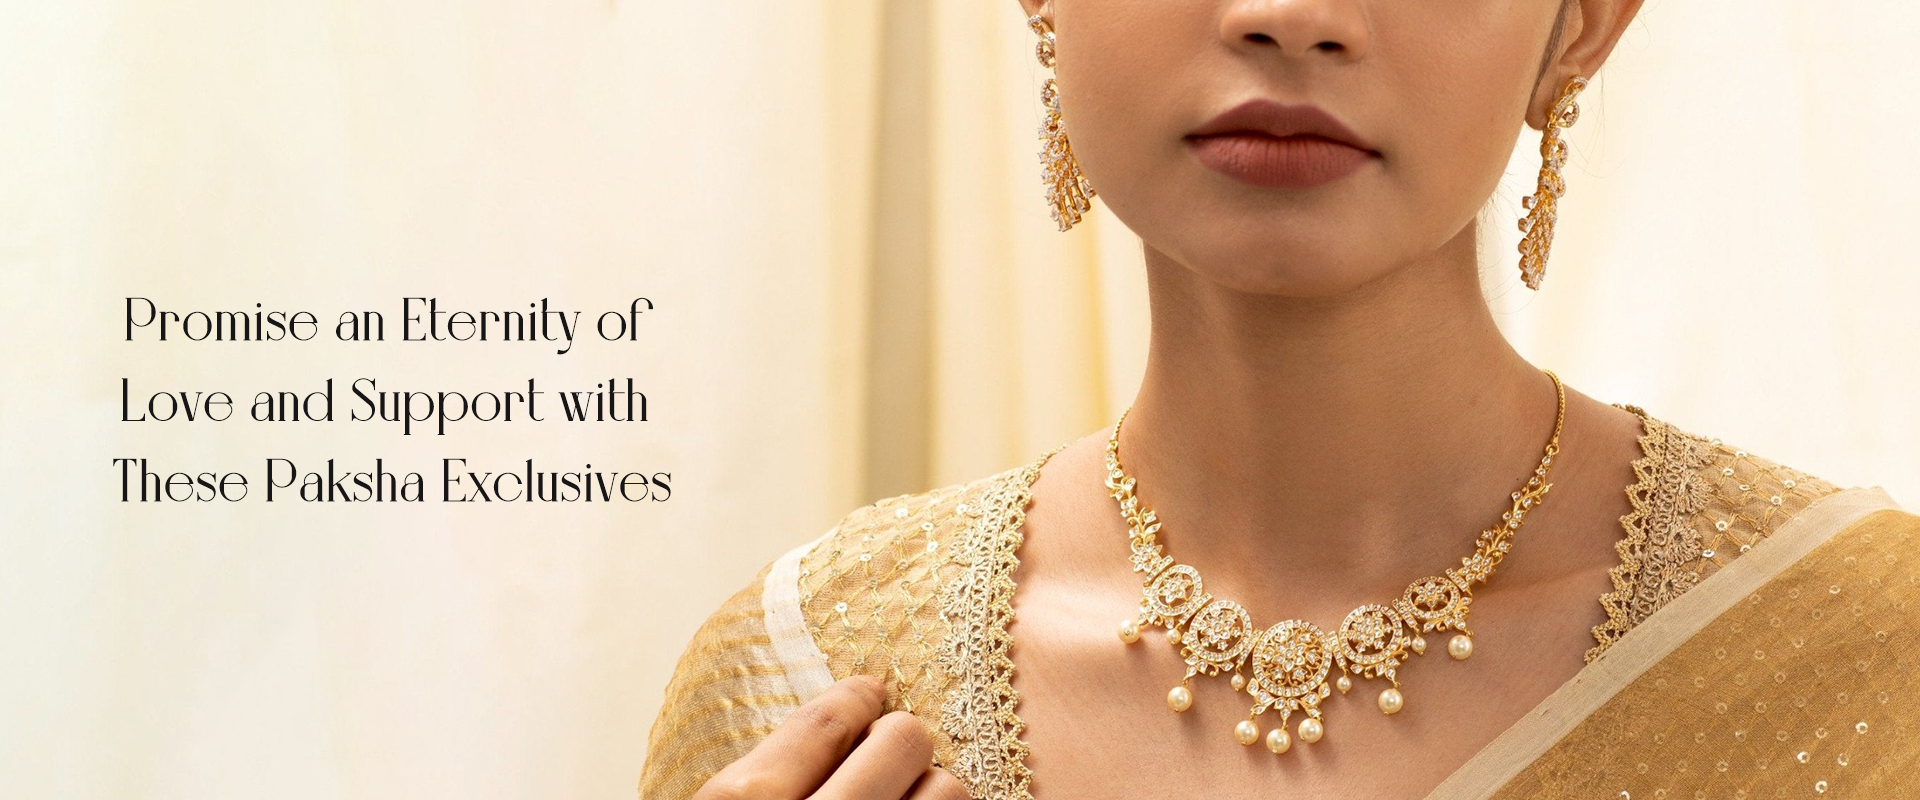 Promise an Eternity of Love and Support with These Paksha Exclusives